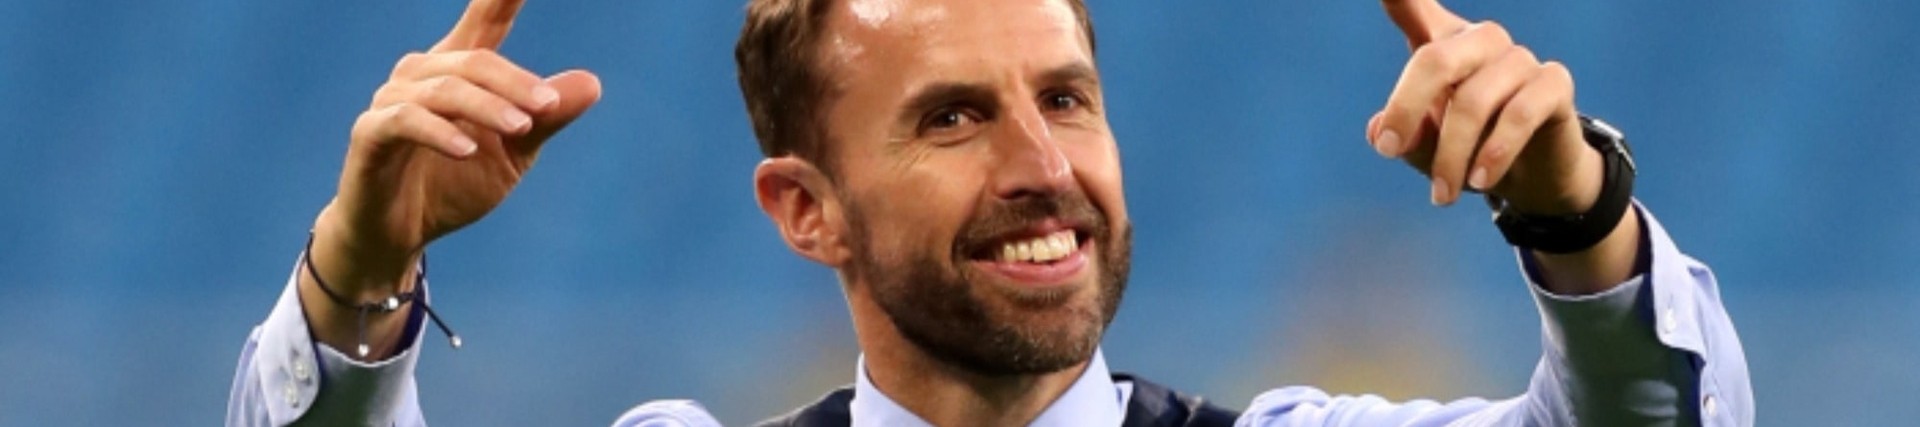 Gareth Southgate: Lessons in leadership from the pitch to the boardroom